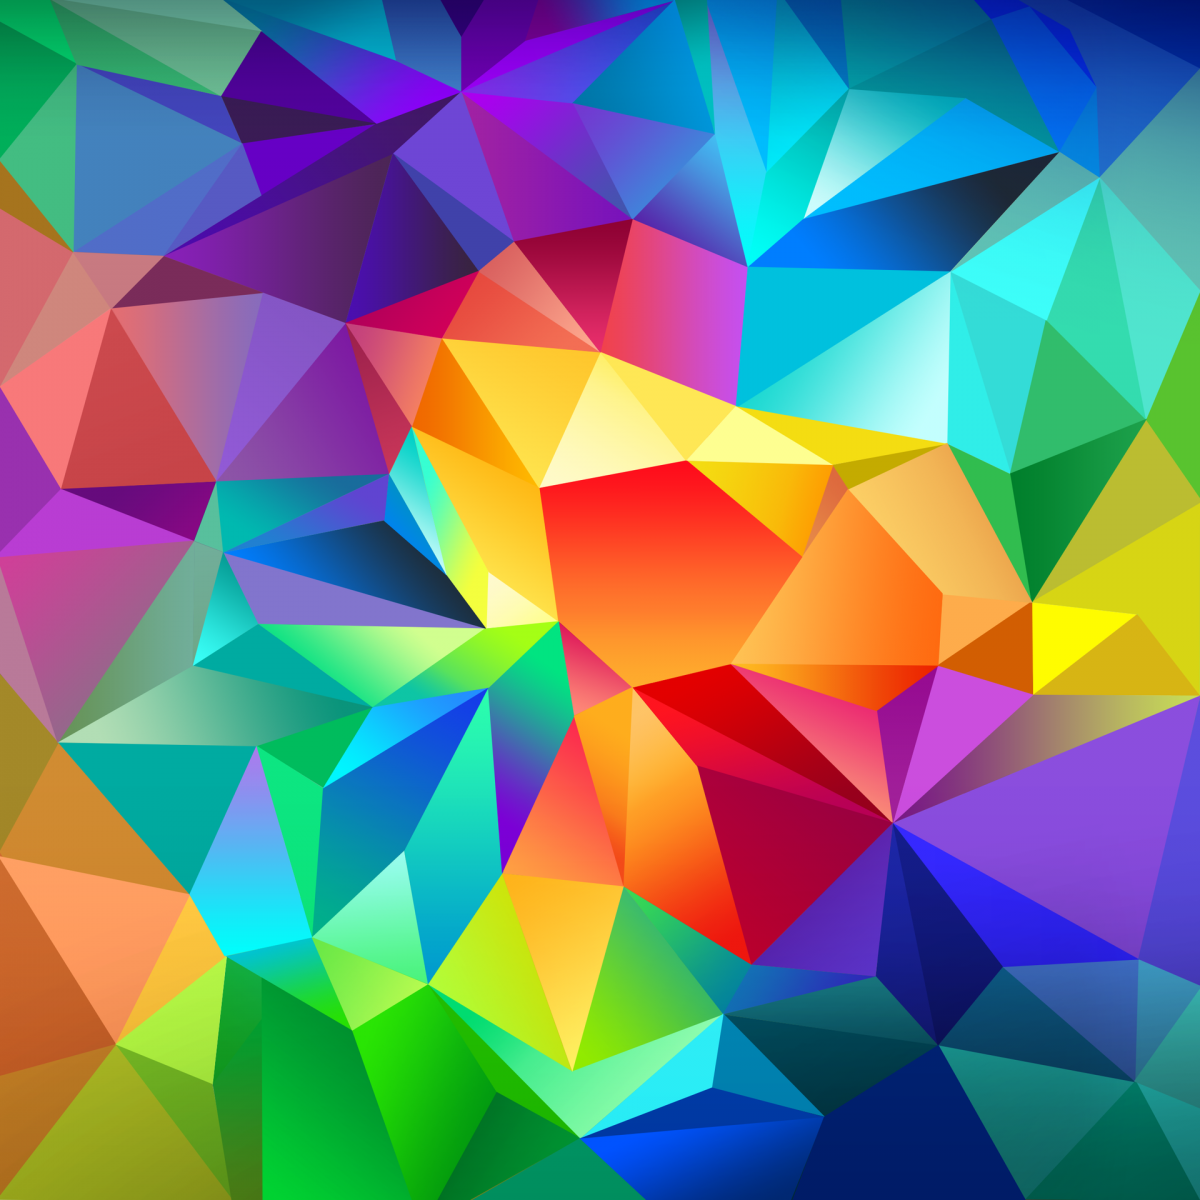 Download] Get all the Samsung Galaxy S5 wallpapers here Now